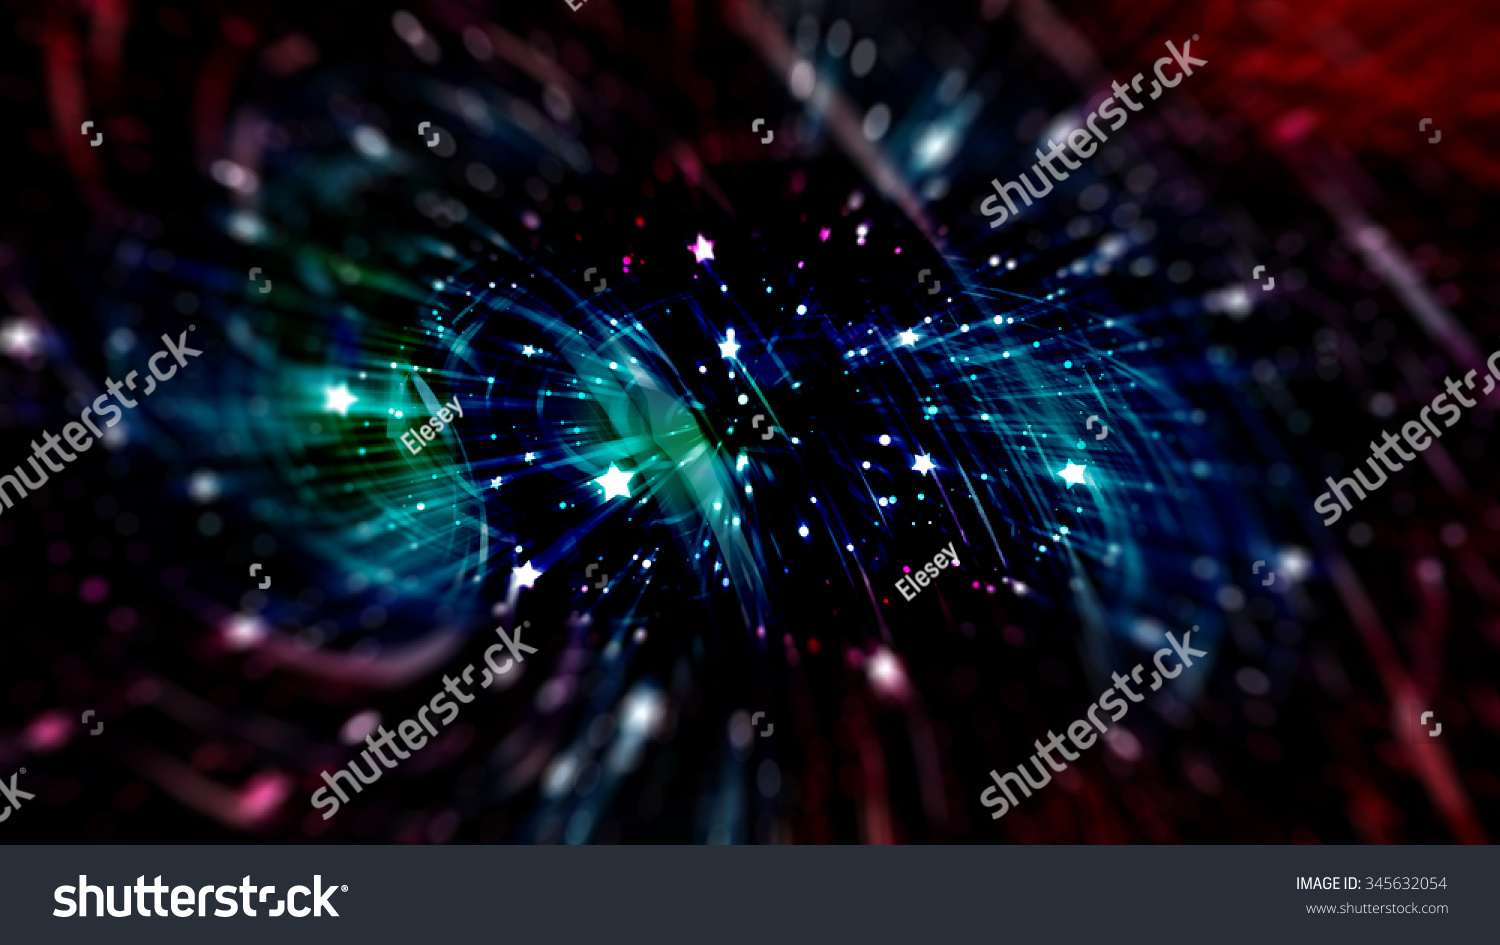 Multicolored abstract background holidays lights in motion blur image #345632054